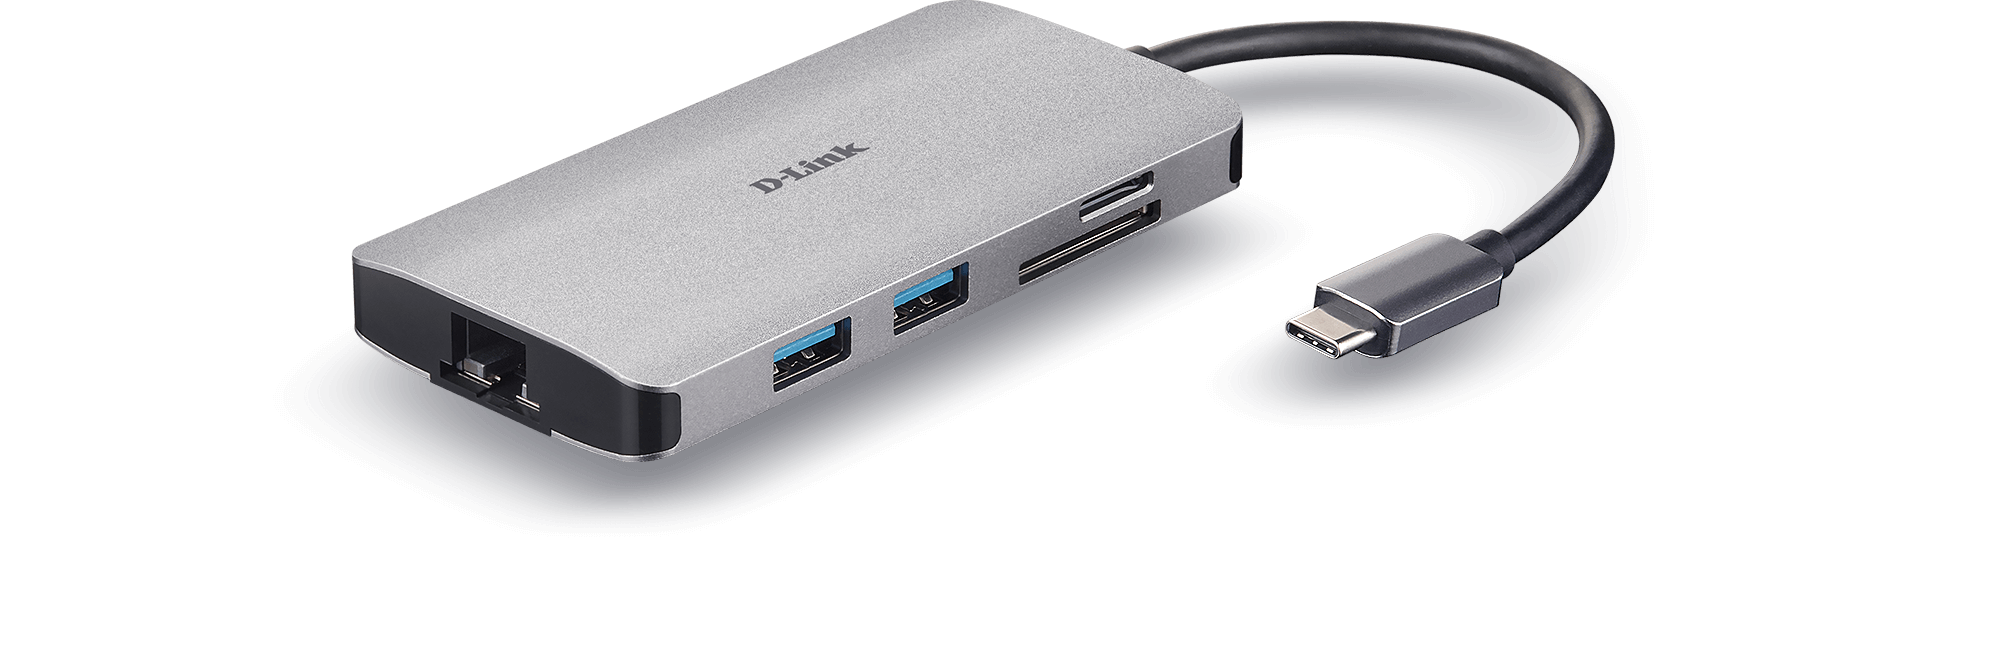 DUB-M810 8-in-1 USB-C Hub with HDMI/Ethernet/Card Reader/Power Delivery - overview